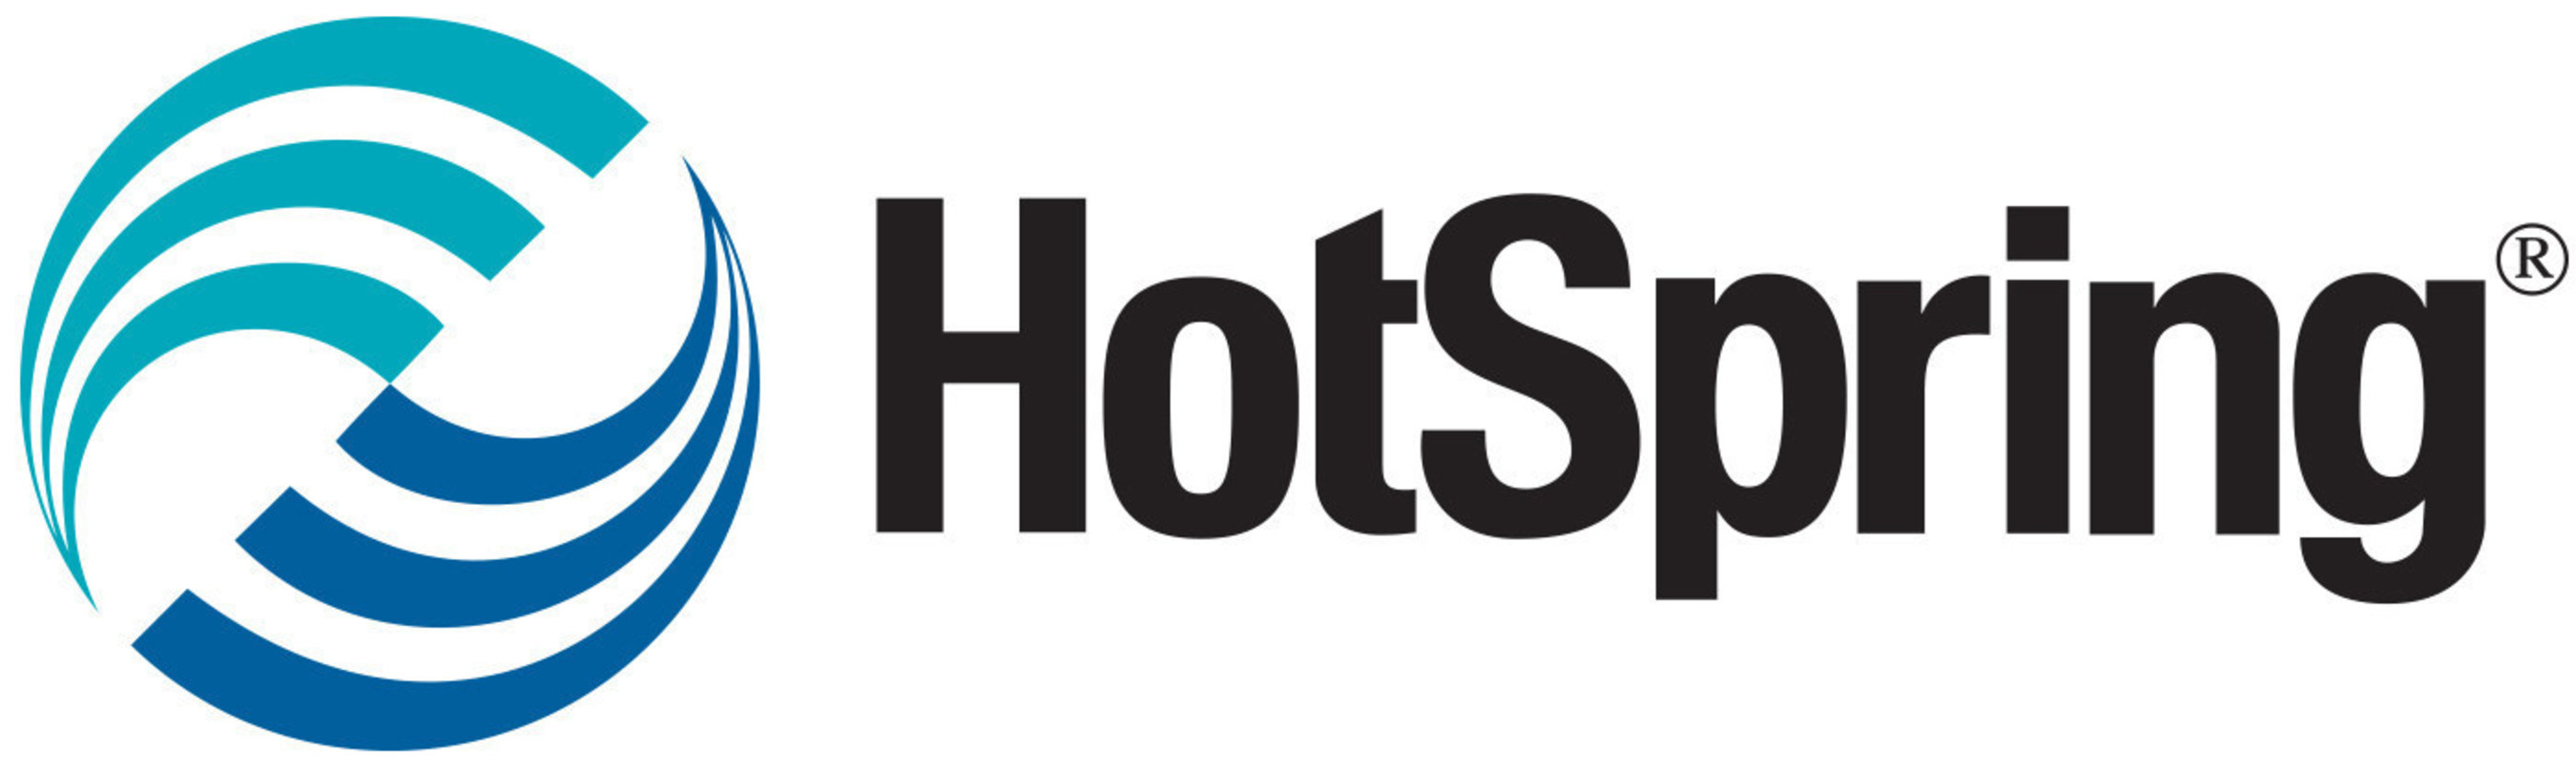 Hot Spring, the world's leading hot tub brand.